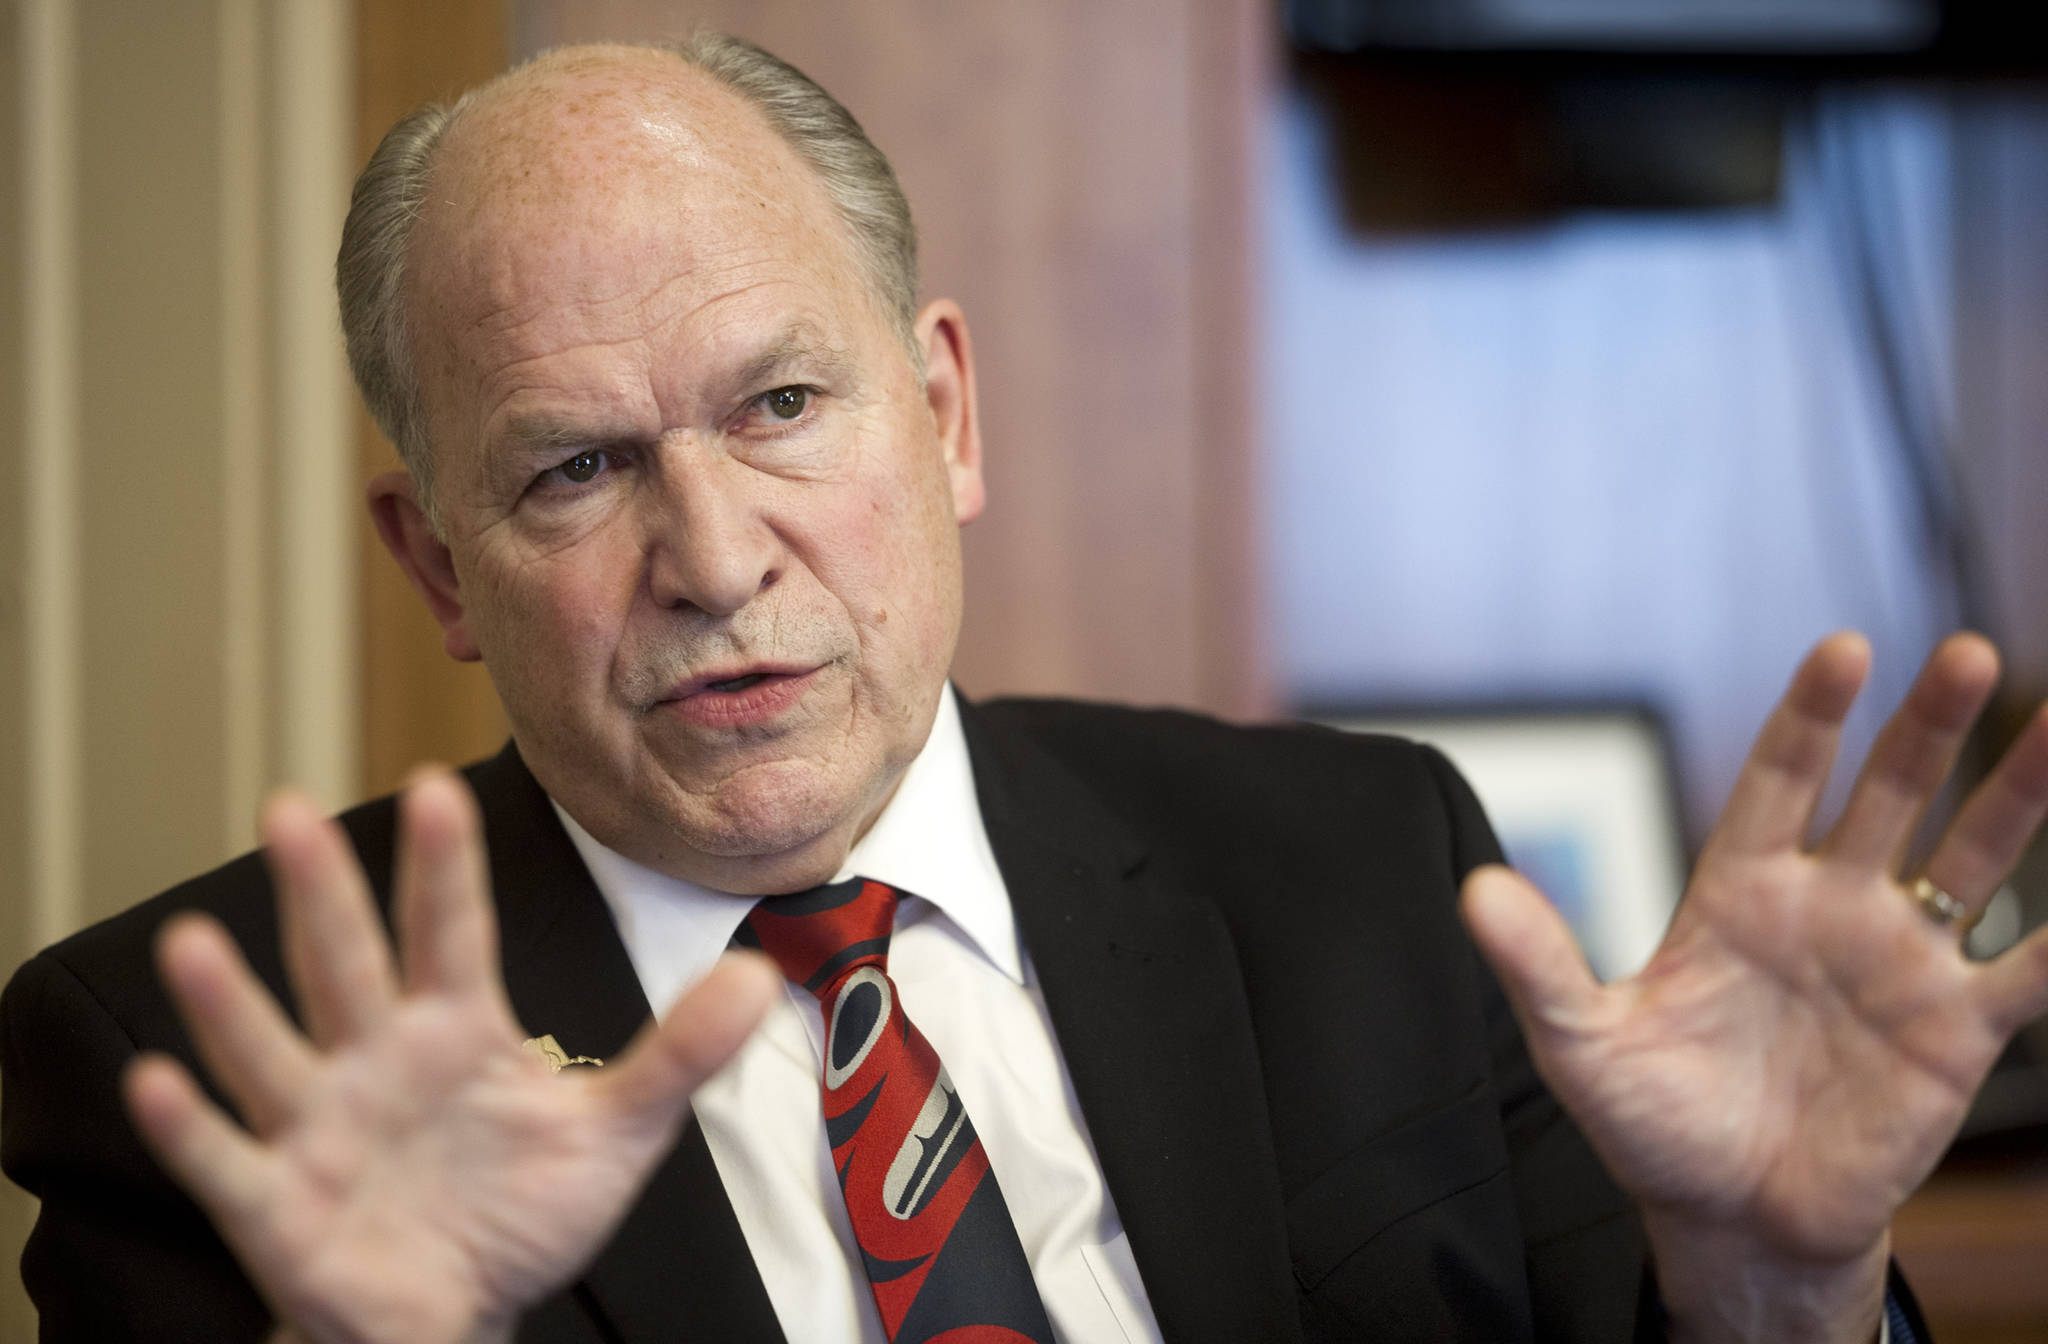 Gov. Bill Walker speaks during an interview in his Capitol office on April 13, 2016. (Michael Penn | Juneau Empire file)